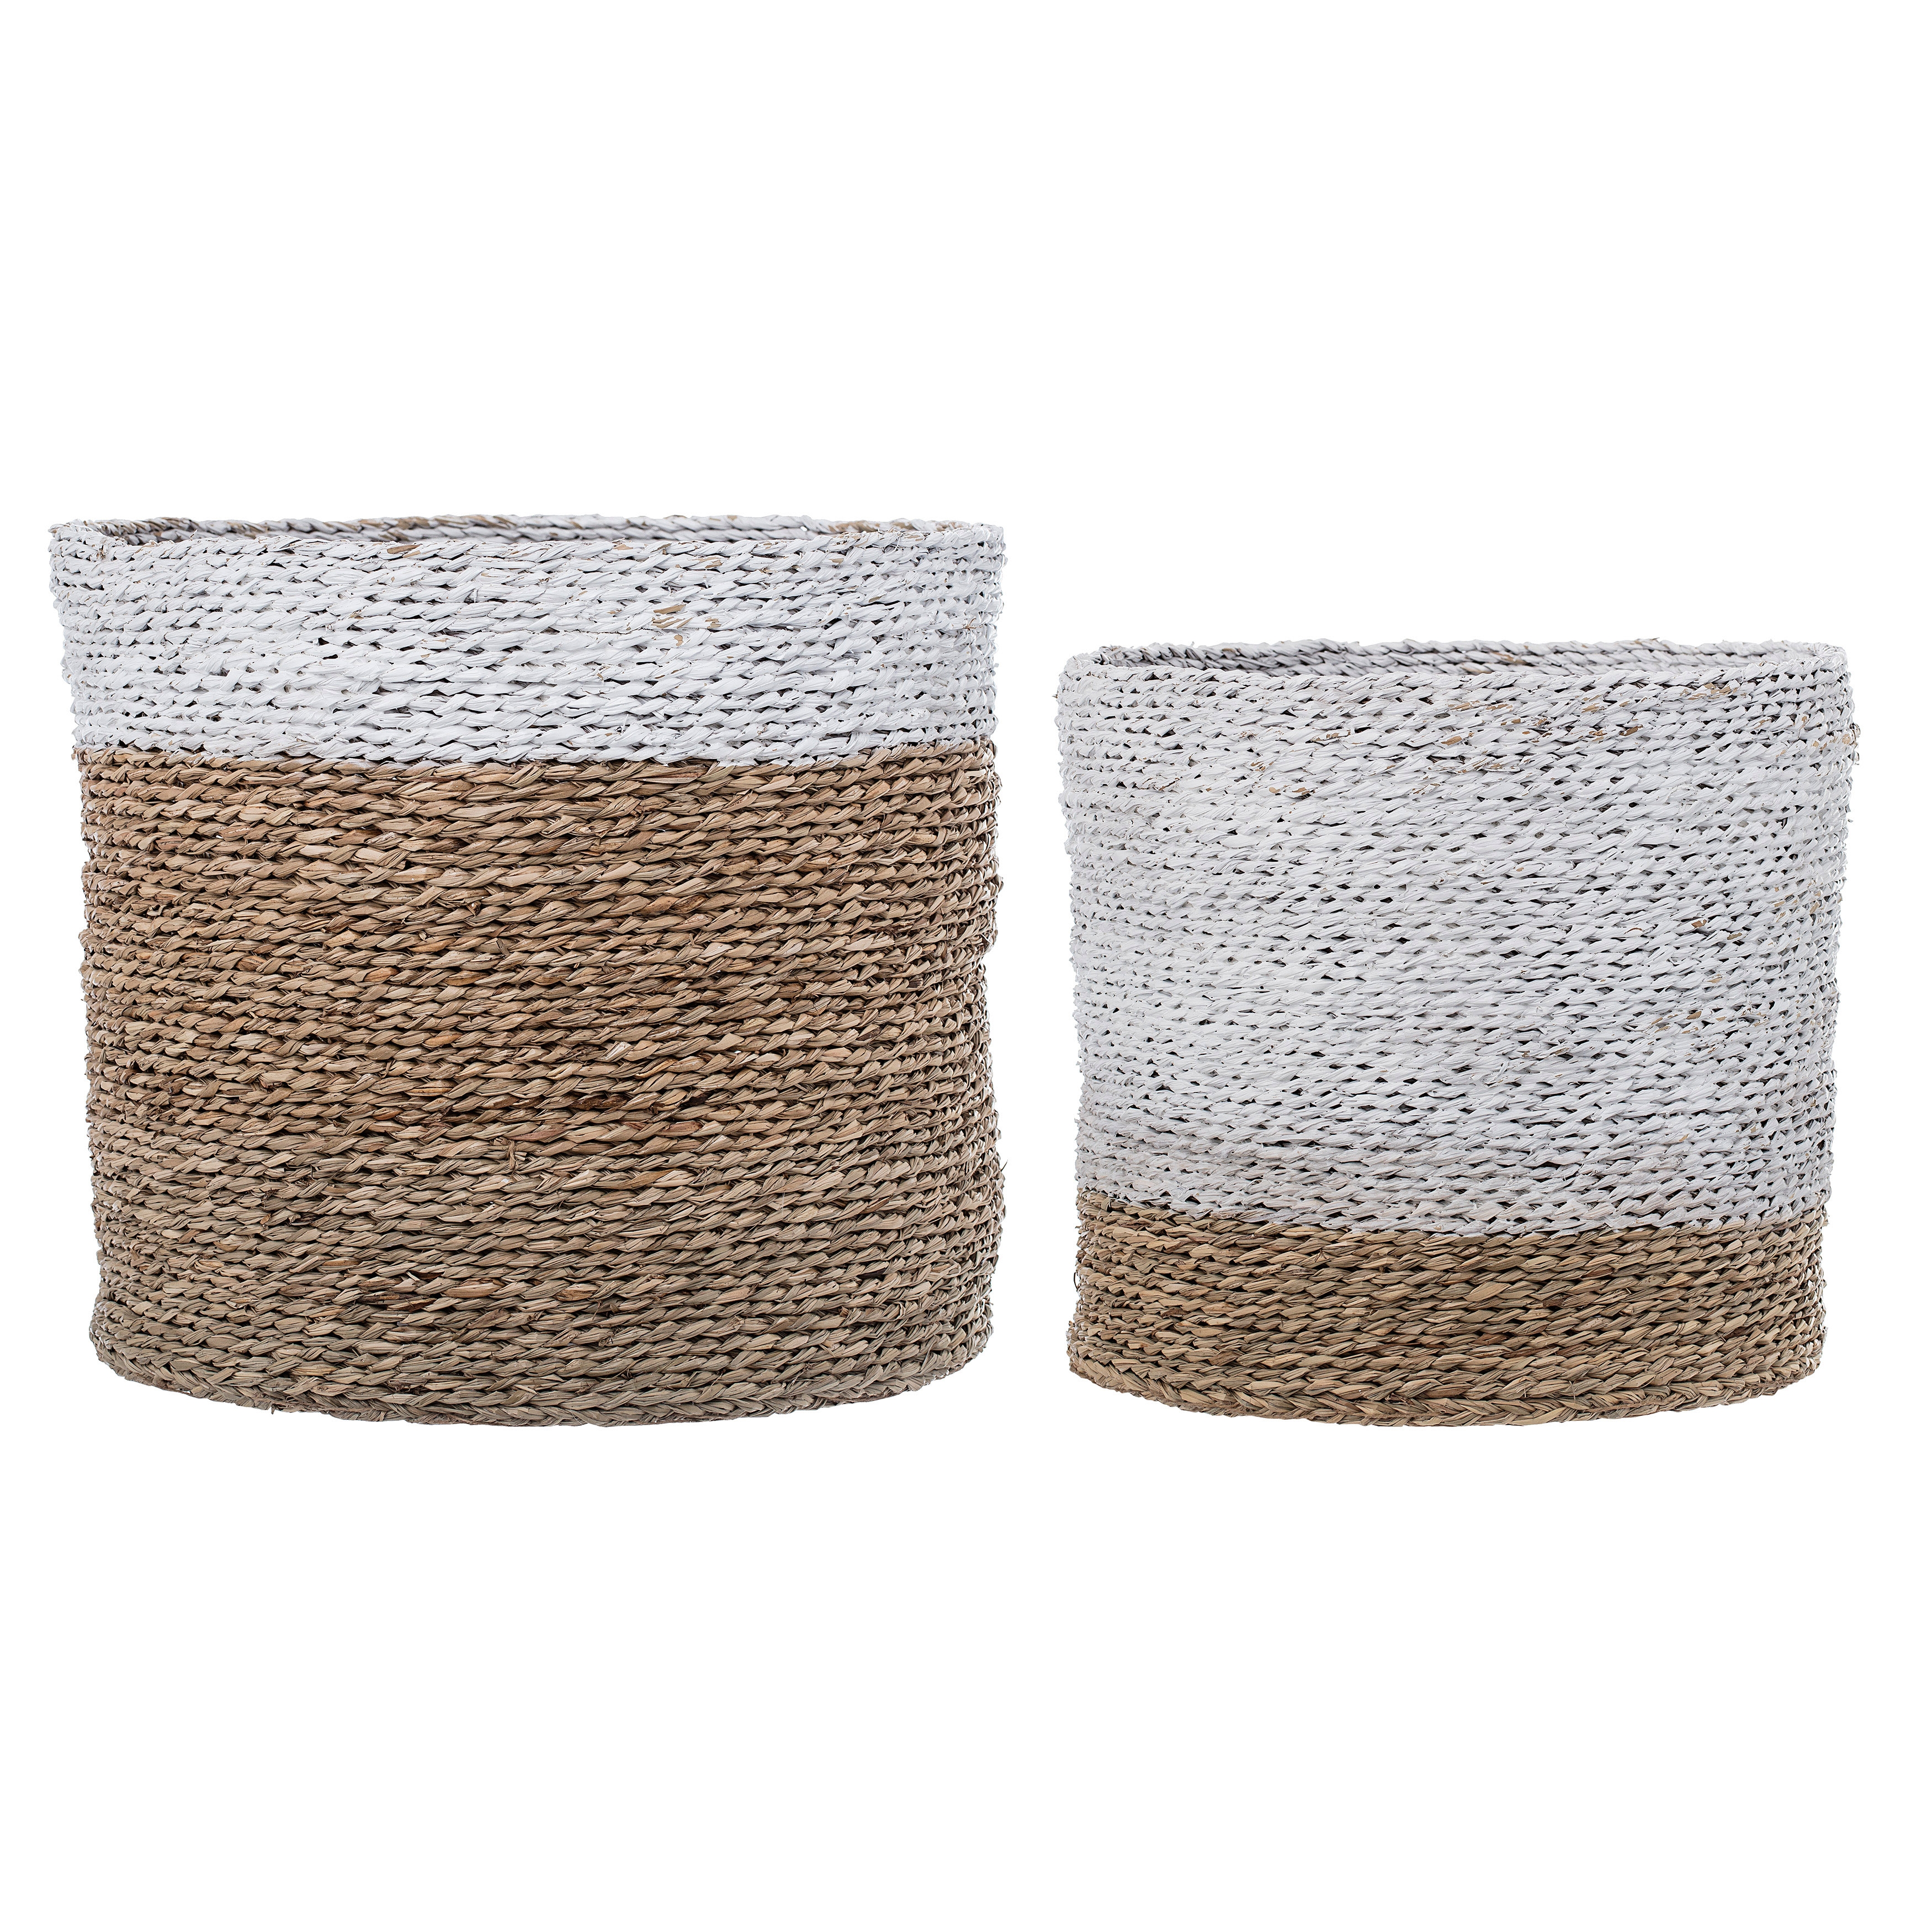 Round Natural Seagrass Baskets (Set of 2) - Image 0